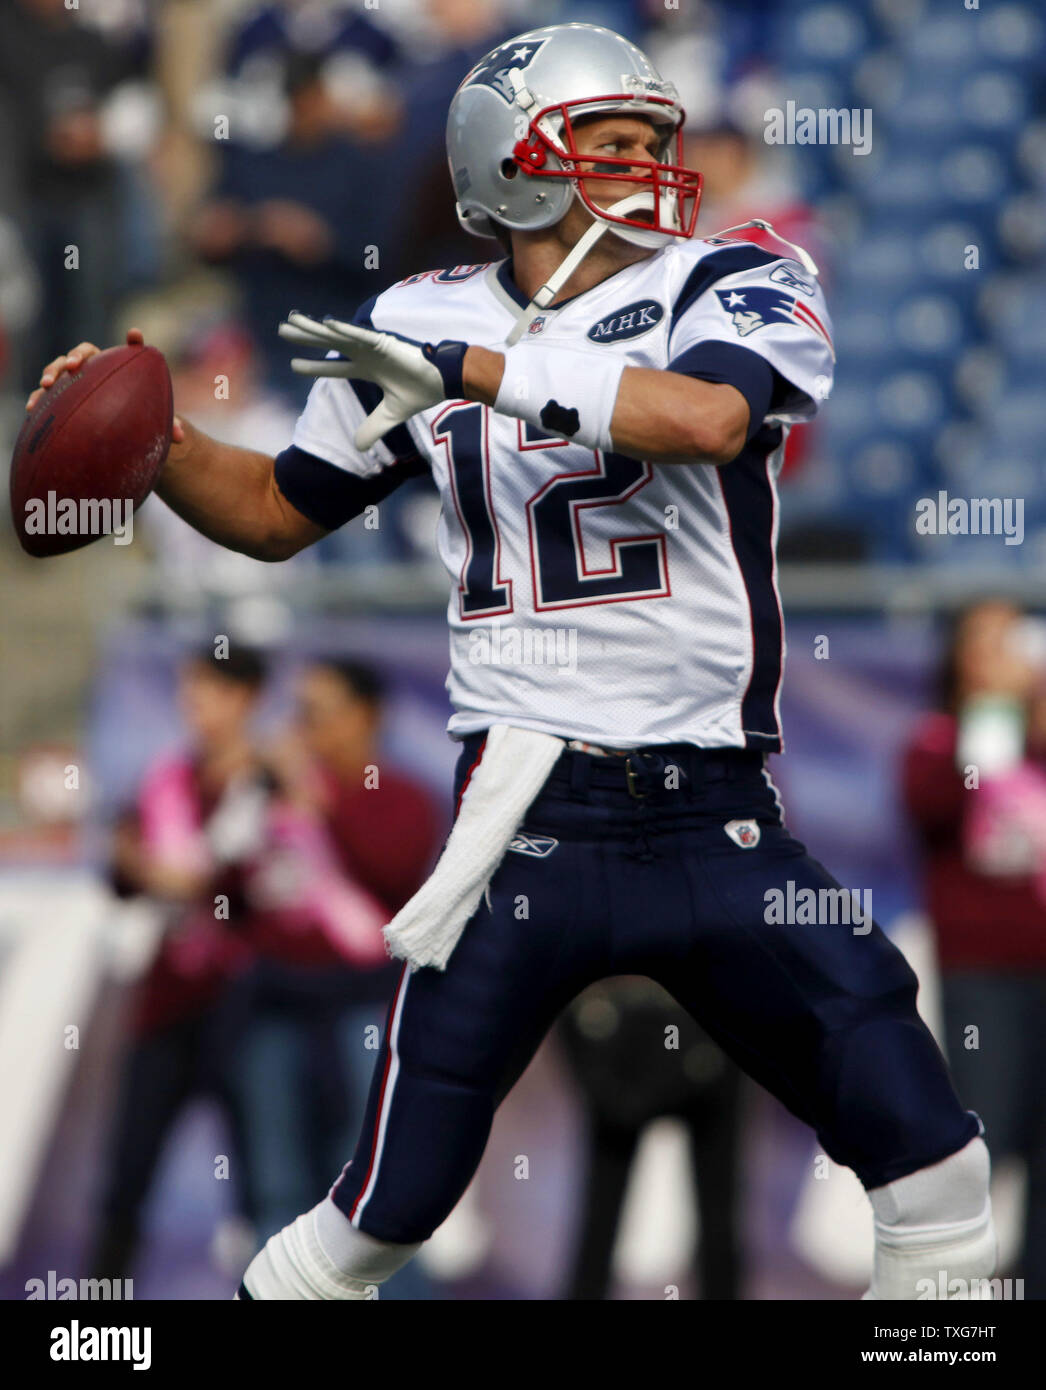 New England Patriots quarterback Tom Brady throws a pass while warming up with teammates before the game against the Dallas Cowboys at Gillette Stadium in Foxboro, Massachusetts on October 16, 2011.    UPI/Matthew Healey Stock Photo